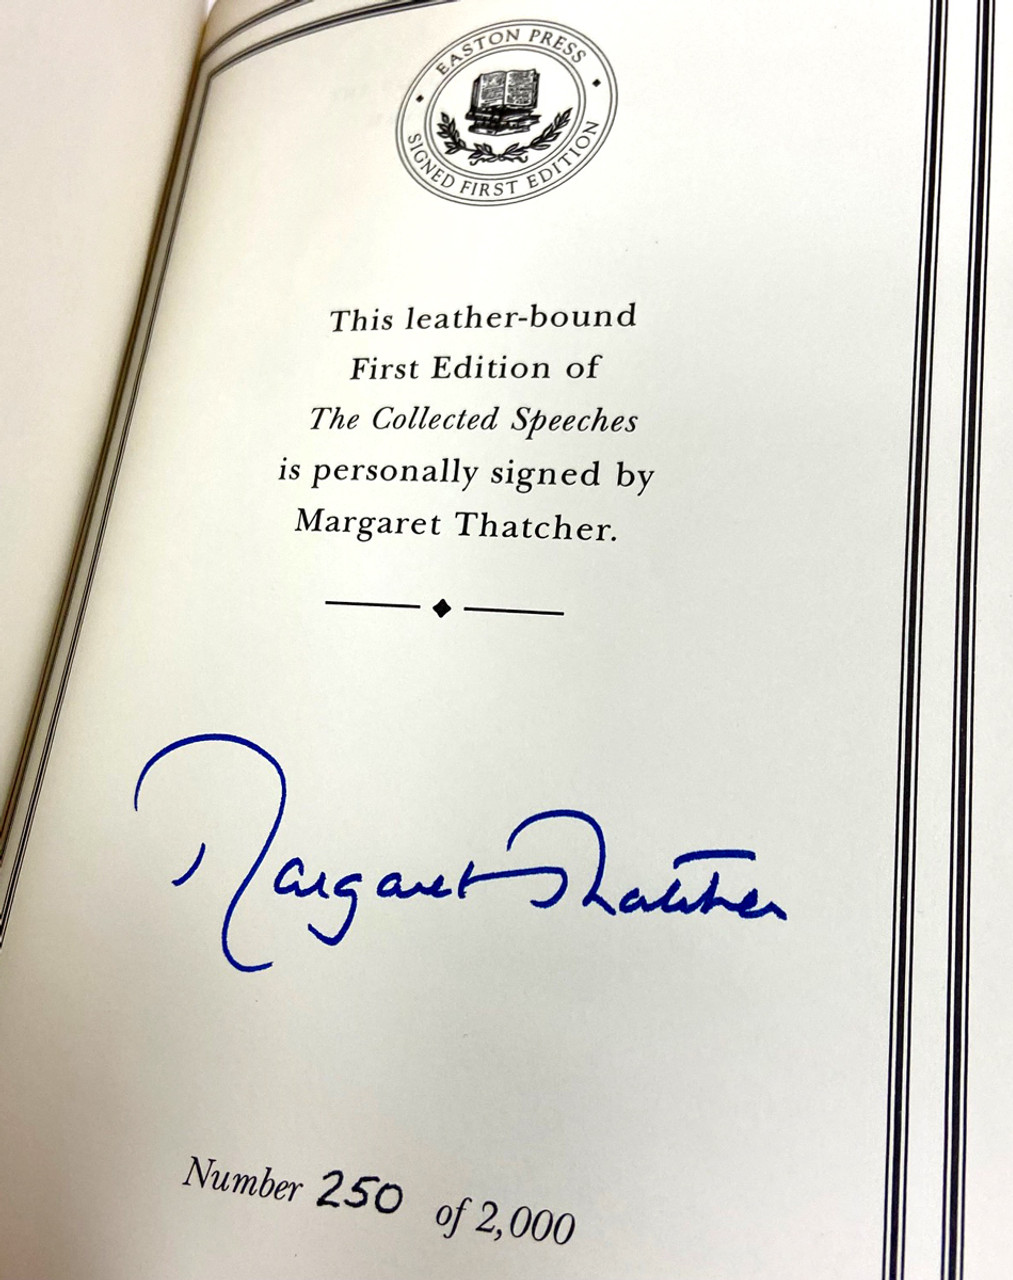 Lady Margaret Thatcher "The Collected Speeches" Leather Bound Limited Edition, Signed First Edition No. 250 of 2,000 w/COA